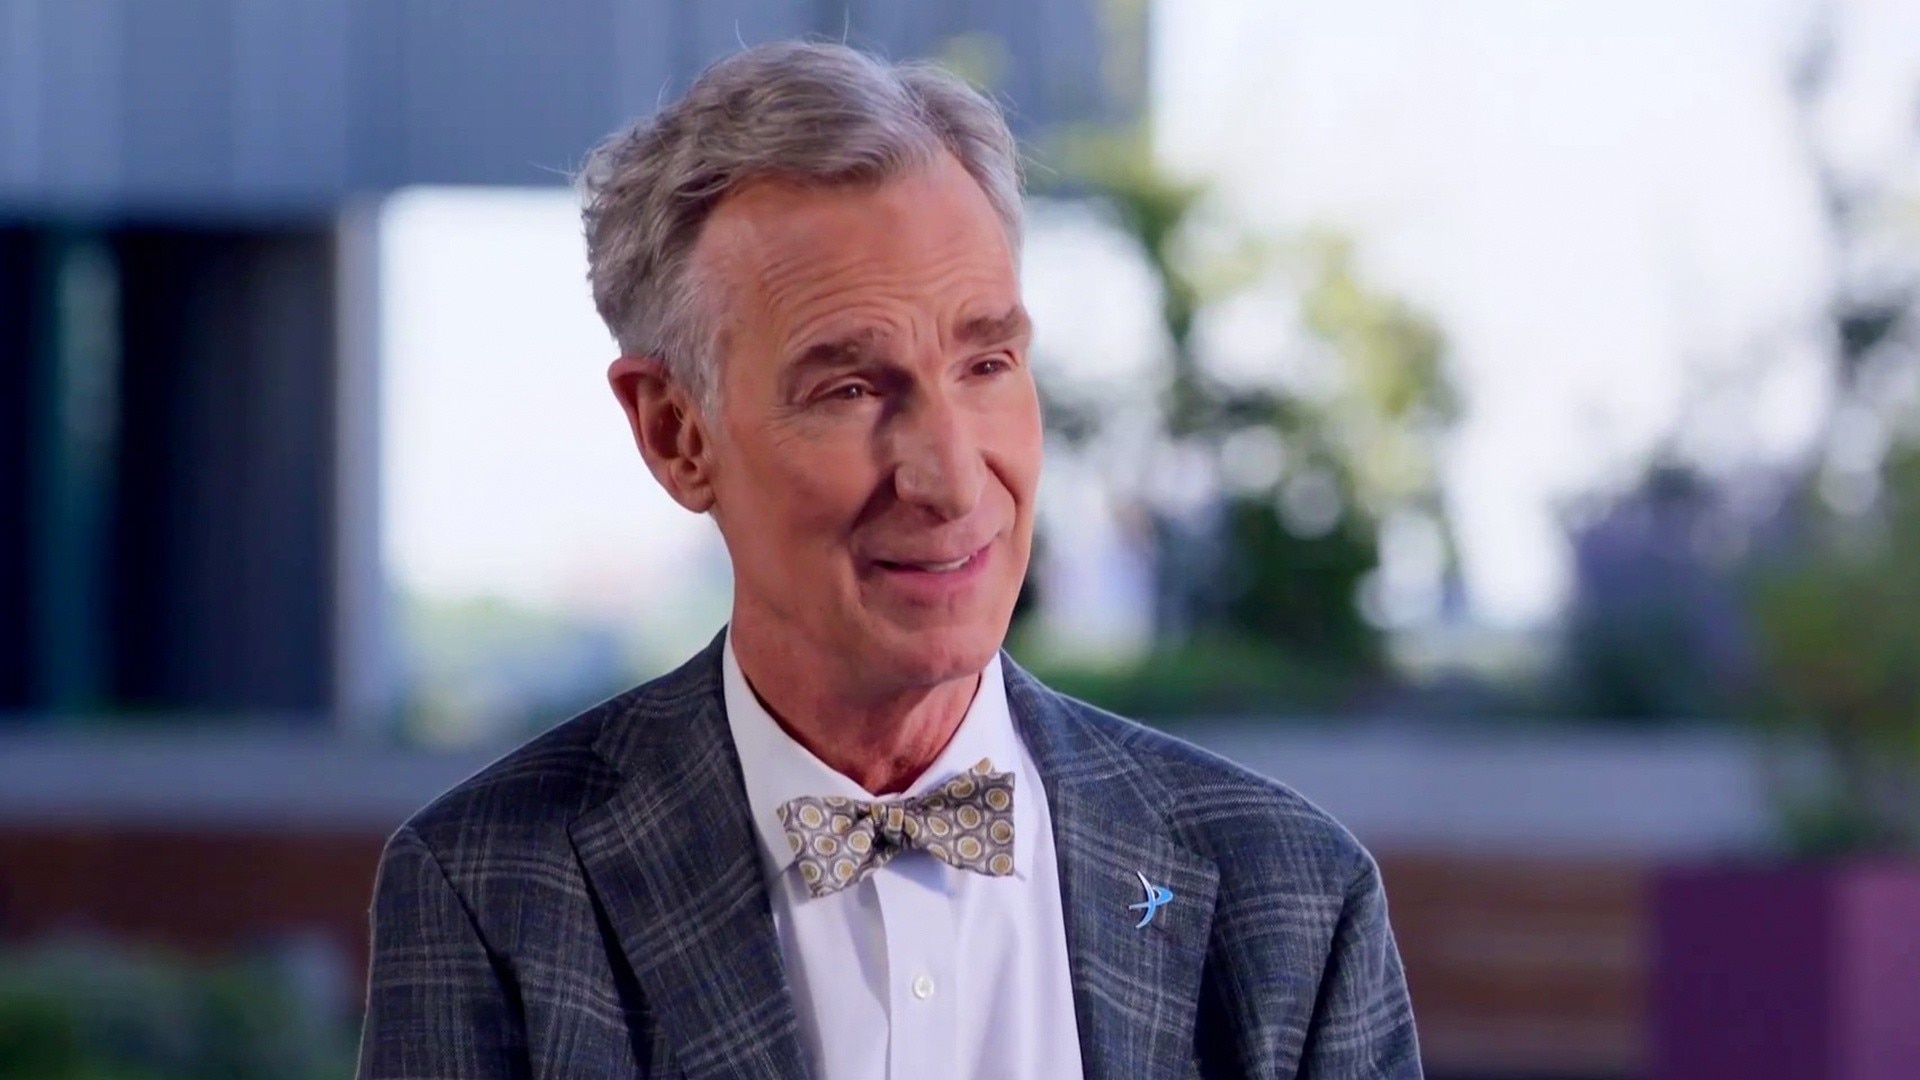 Watch TODAY Excerpt Bill Nye highlights urgency of protecting Earth in